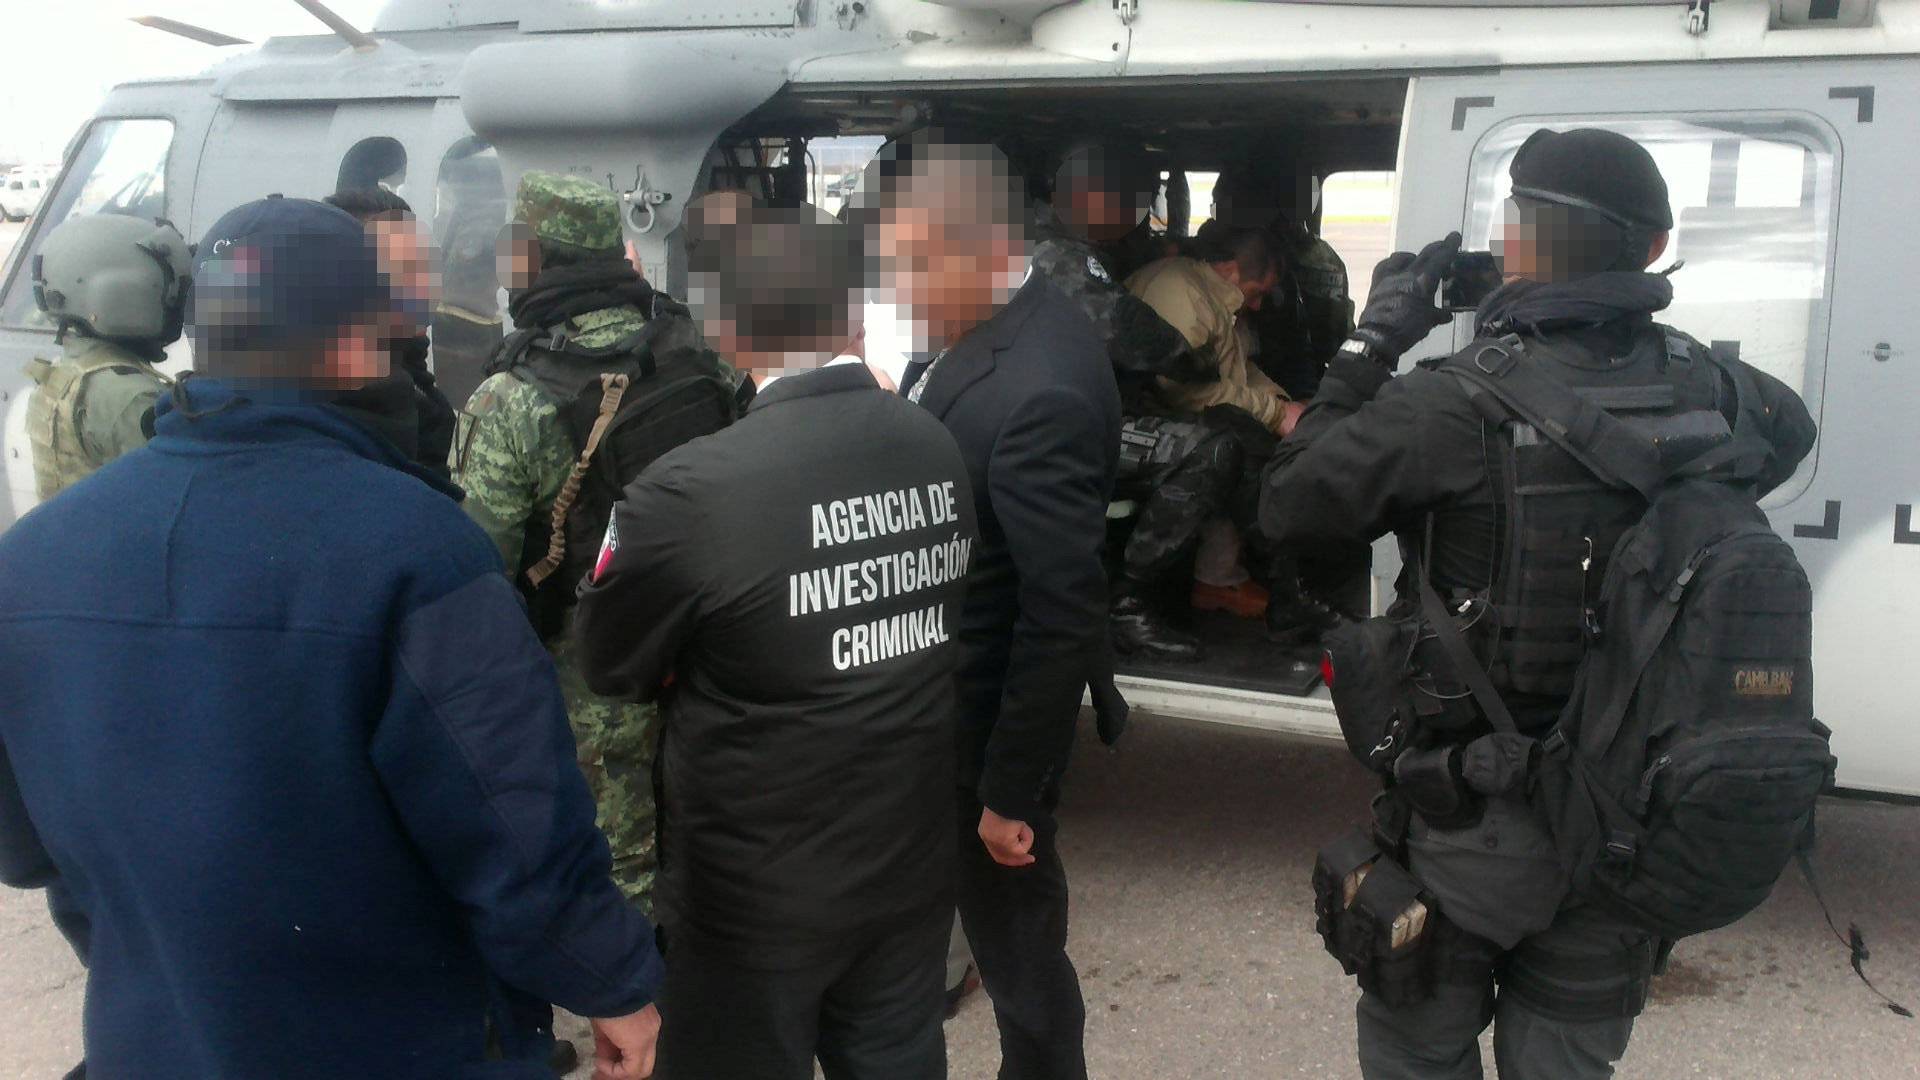 Mexico's top drug lord Joaquin "El Chapo" Guzman sits in a helicopter in Ciudad Juarez, Mexico, as he is extradited to New York